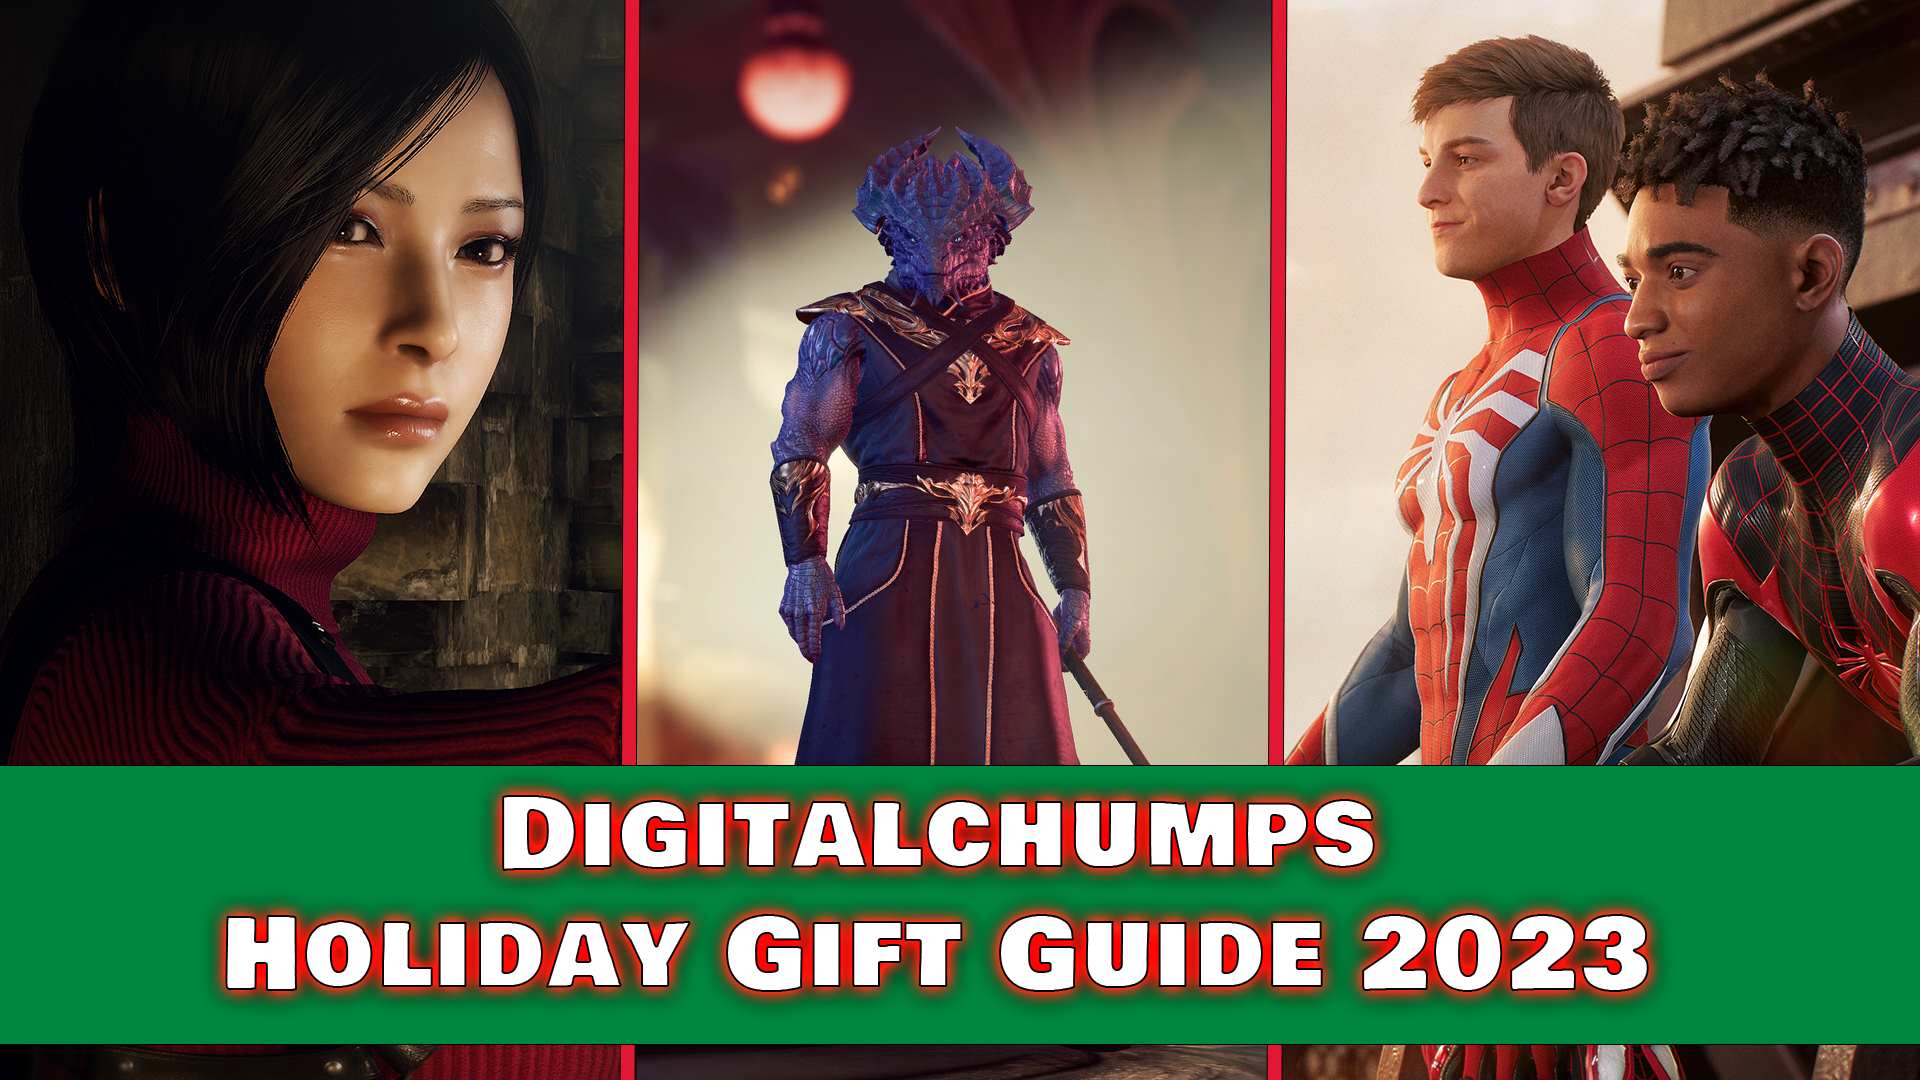 Presenting the 2023 PlayStation Holiday Gift Guide - Sony